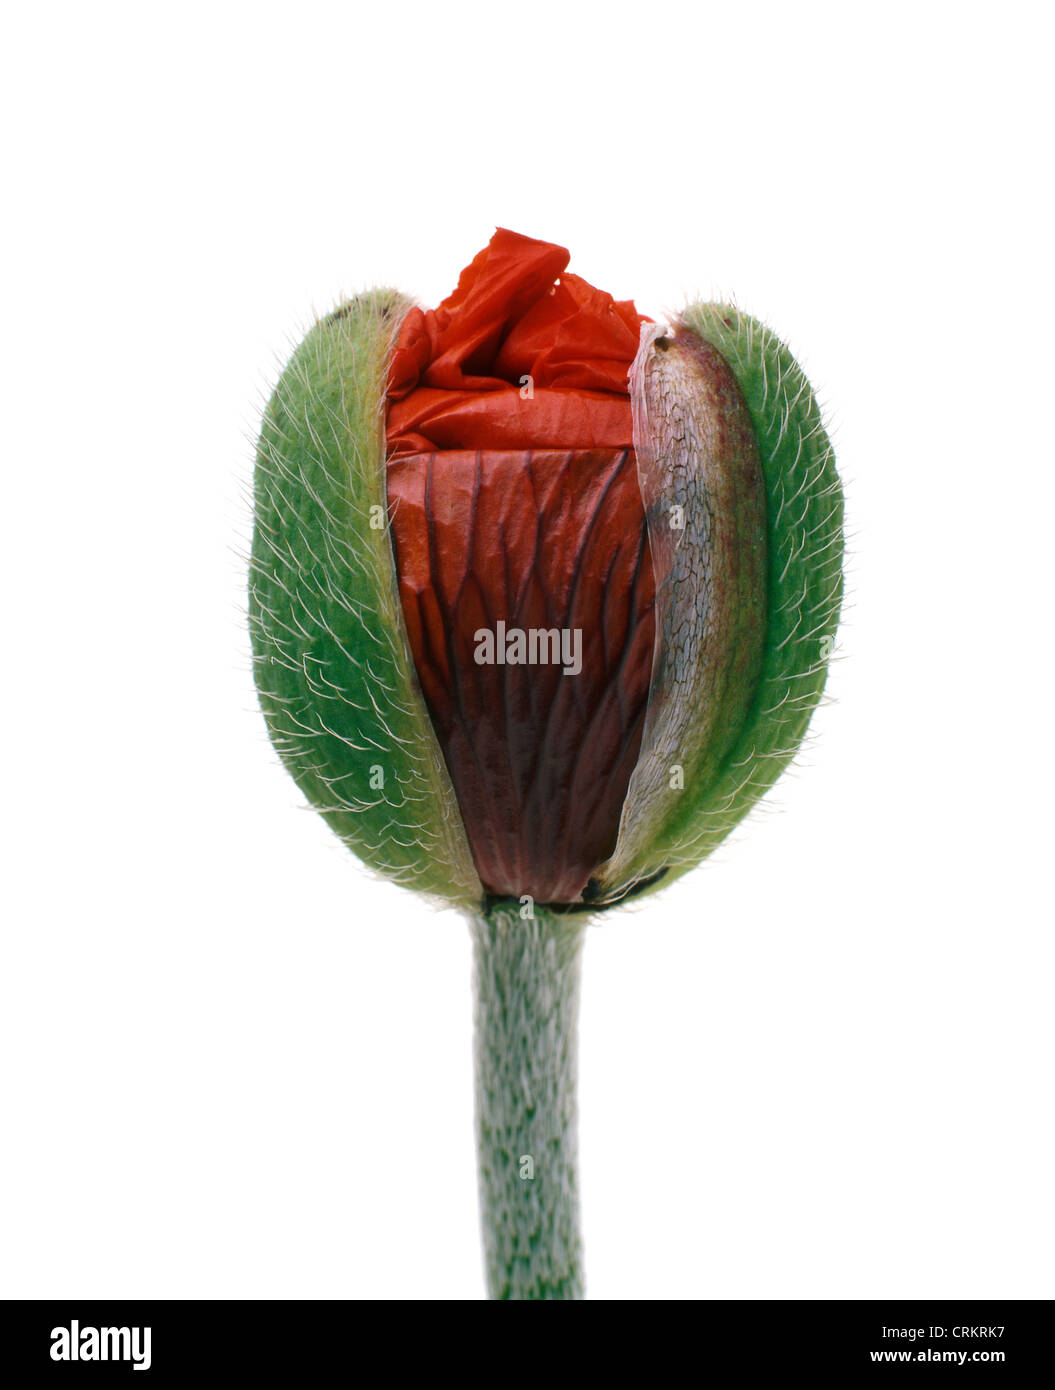 Papaver, Poppy, Red flower petals emerging from a green bud against a white background. Stock Photo